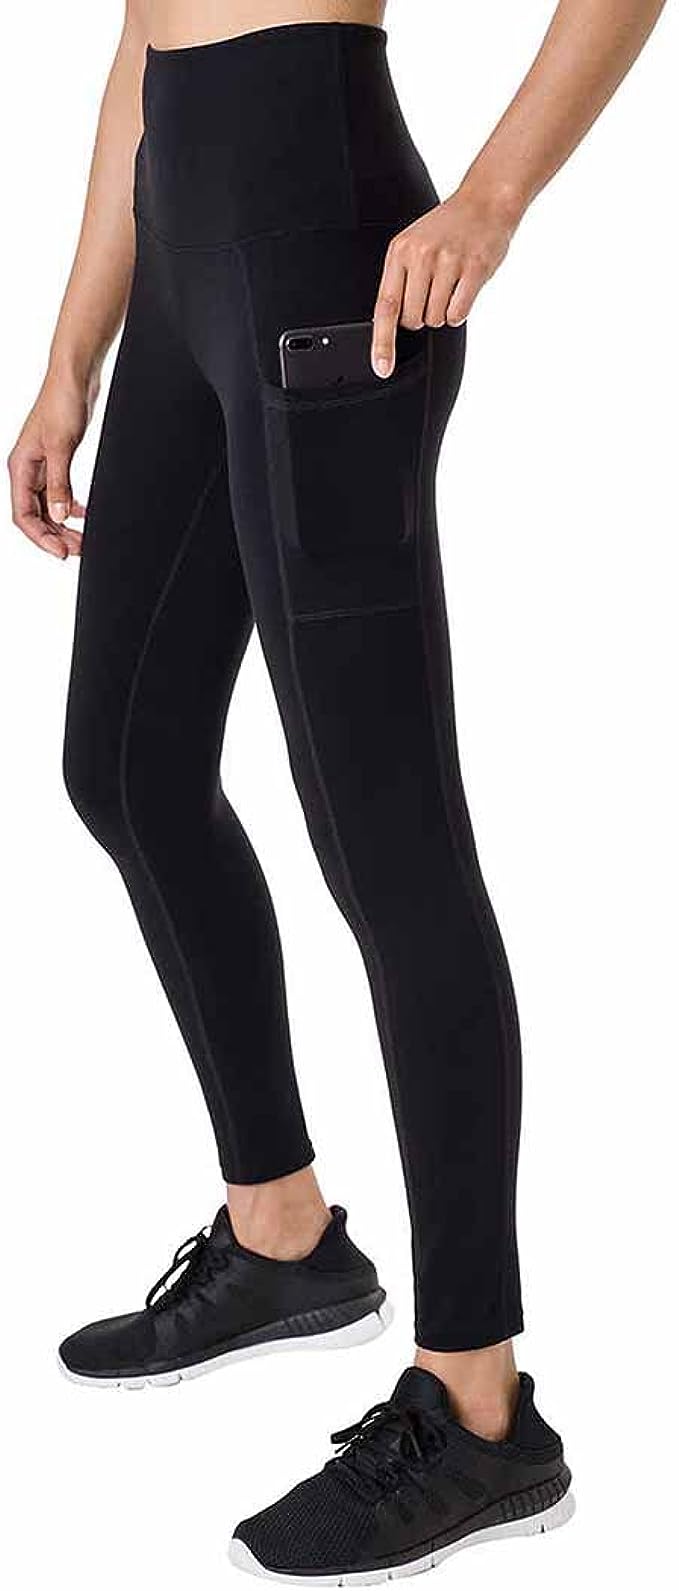 Buy High Waisted Leggings for Women - Soft Athletic Tummy Control Pants for  Running Cycling Yoga Workout - Reg & Plus Size (3 Pack Black, Dark Grey,  Rosy Brown, One Size (US